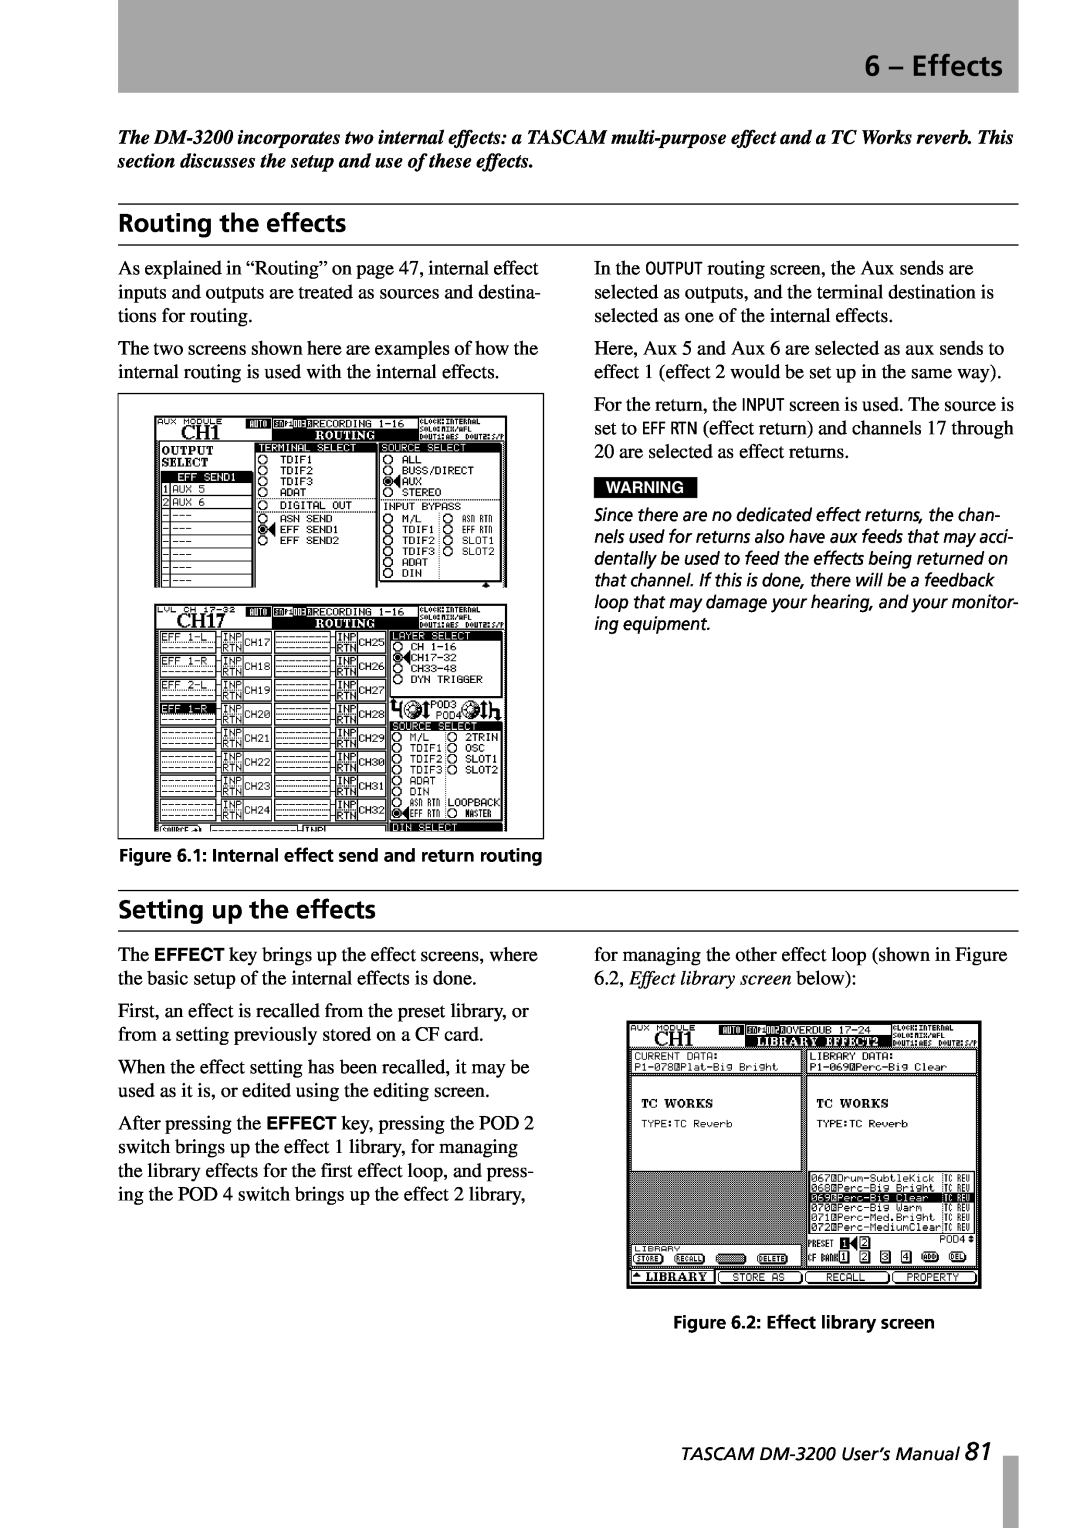 Tascam DM-3200 owner manual 6 – Effects, Routing the effects, Setting up the effects 